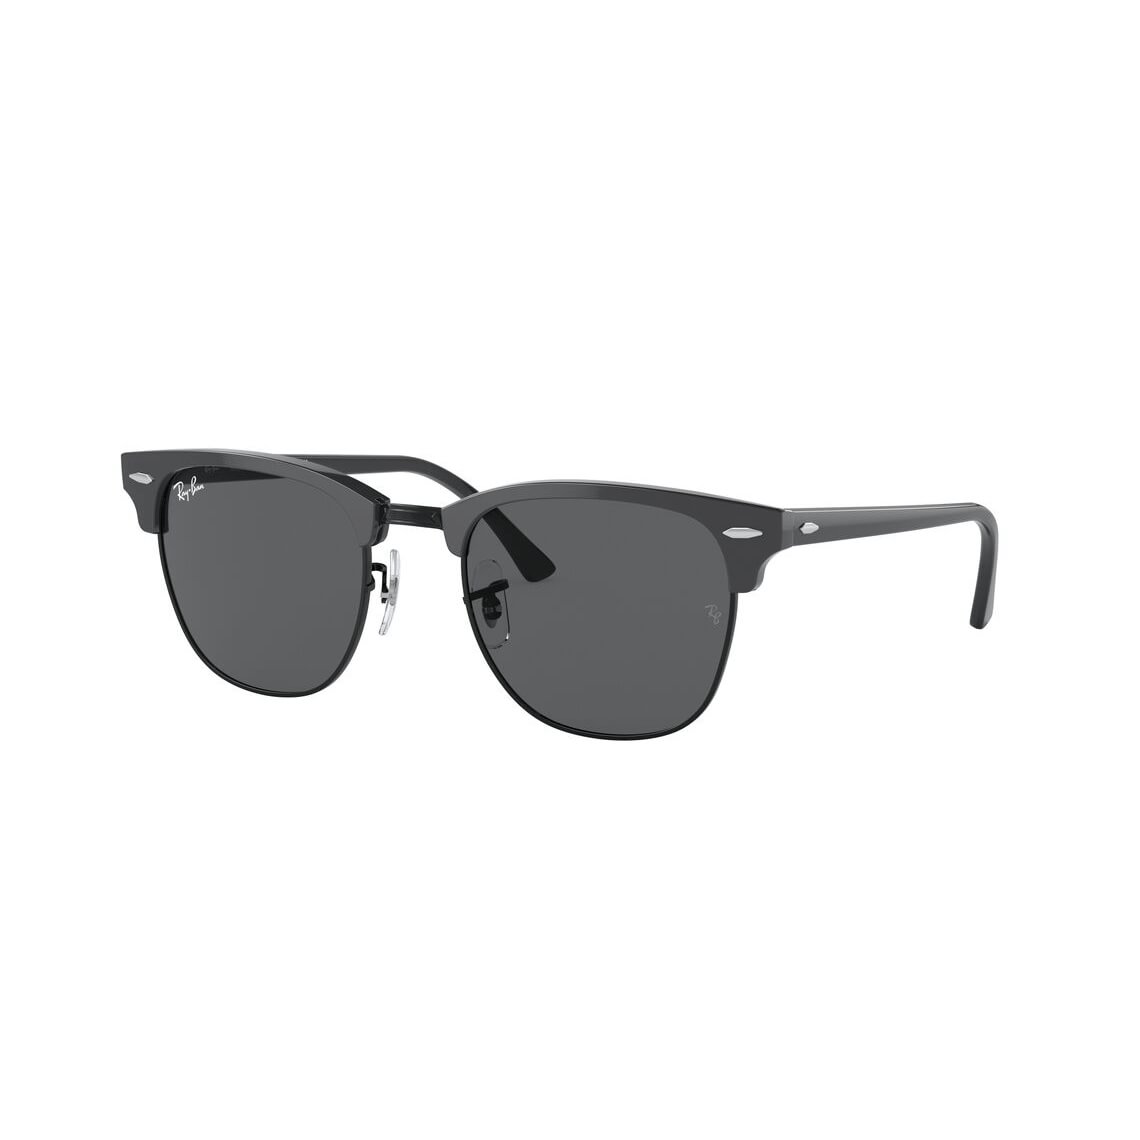 Ray-Ban Clubmaster RB3016 1367B1 5521